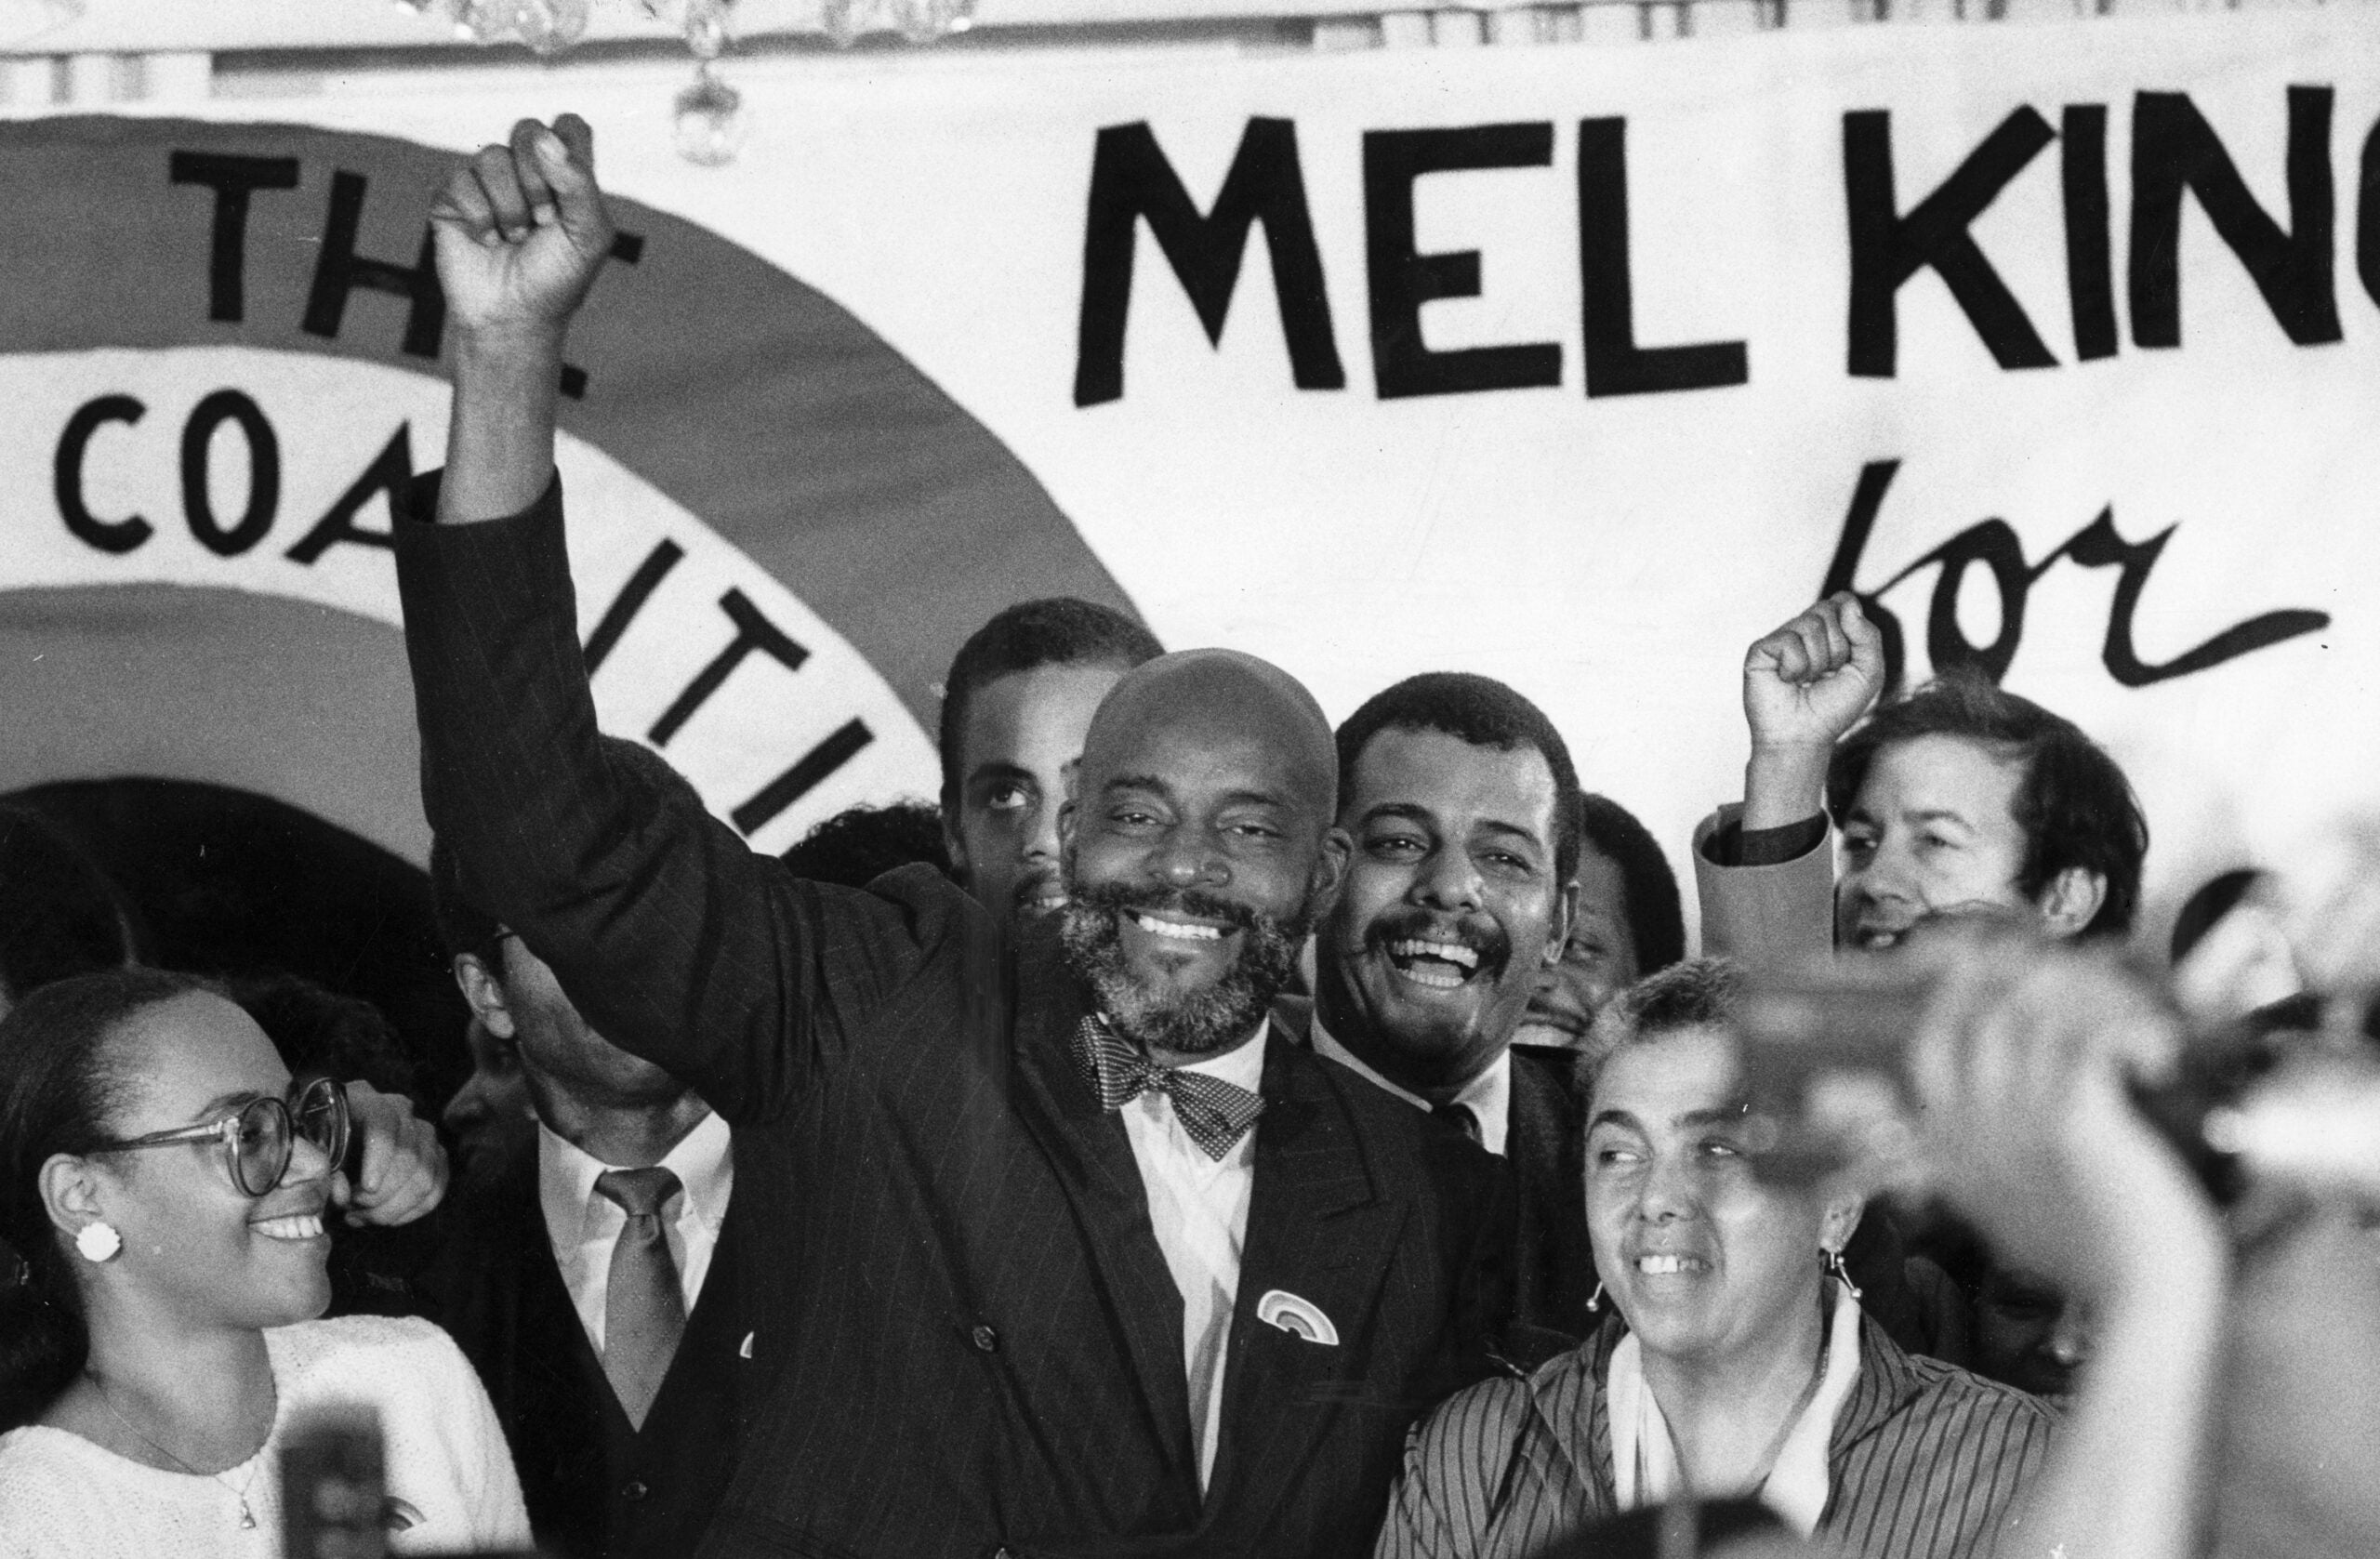 Melvin "Mel" H. King celebrates at the Parker House in Boston on Oct. 11, 1983, after finding out he made it into the final round of elections for Boston mayor.